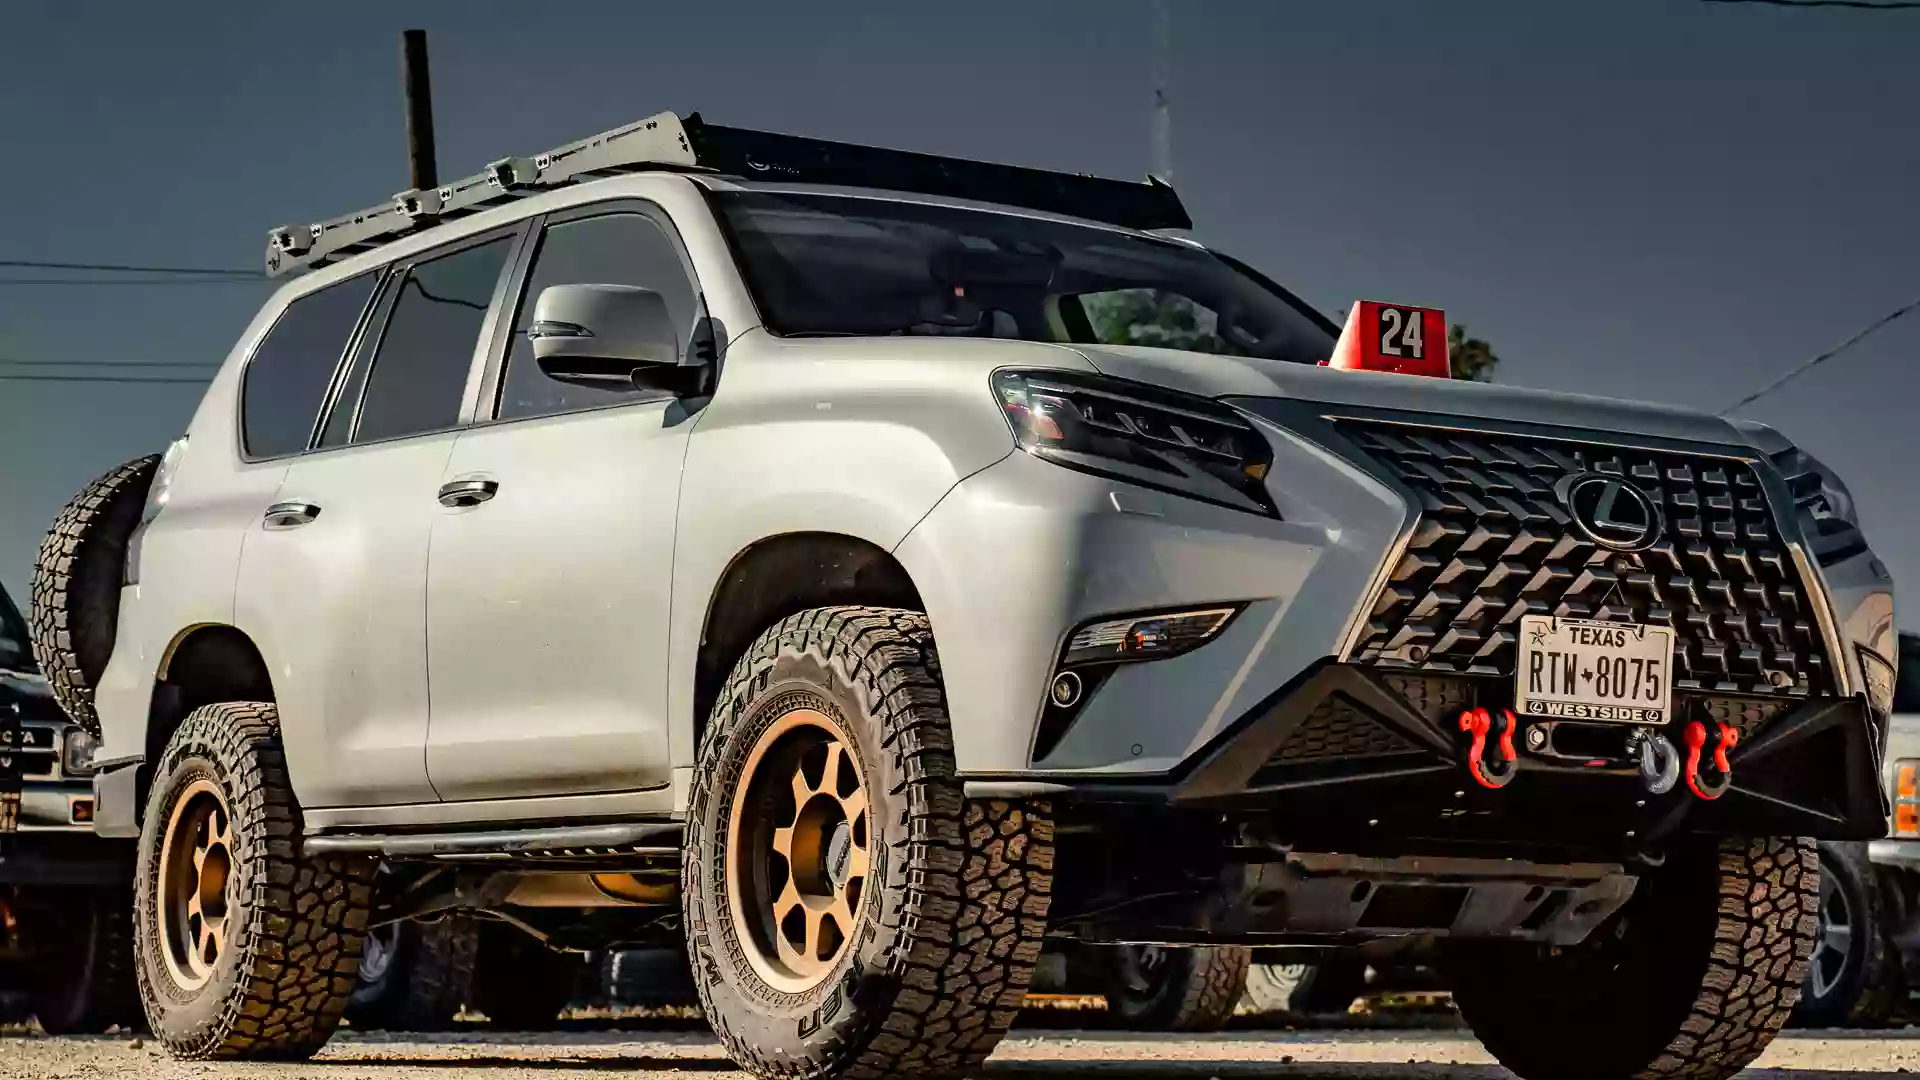 duggy's garage - Toyota Offroad Specialists